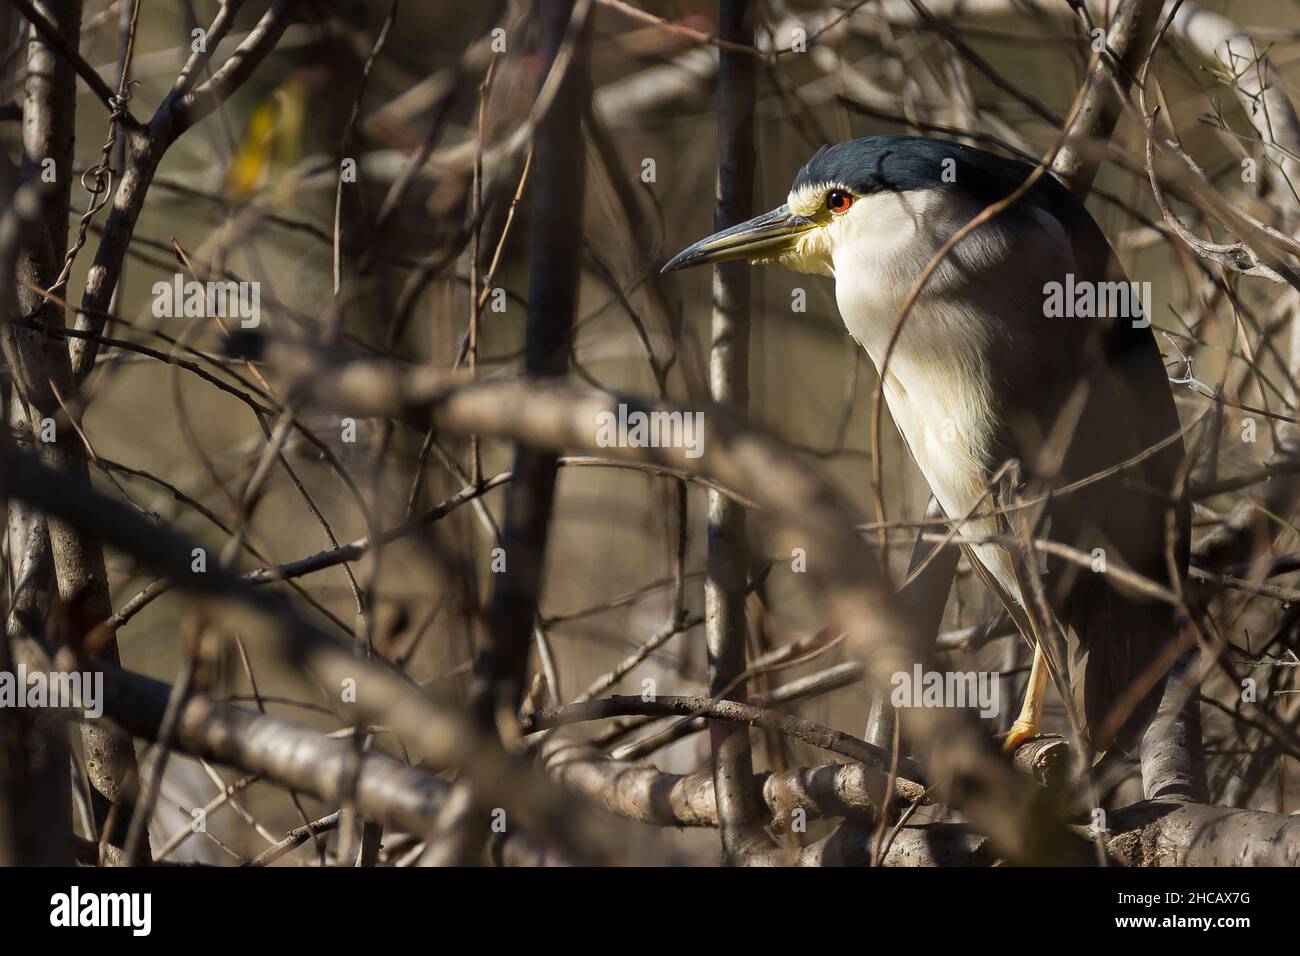 A black crowned night heron (Nycticorax nycticorax) roosting in some undergrowth by a small lake inIzumi no Mori park, Kanagawa, Japan. Stock Photo